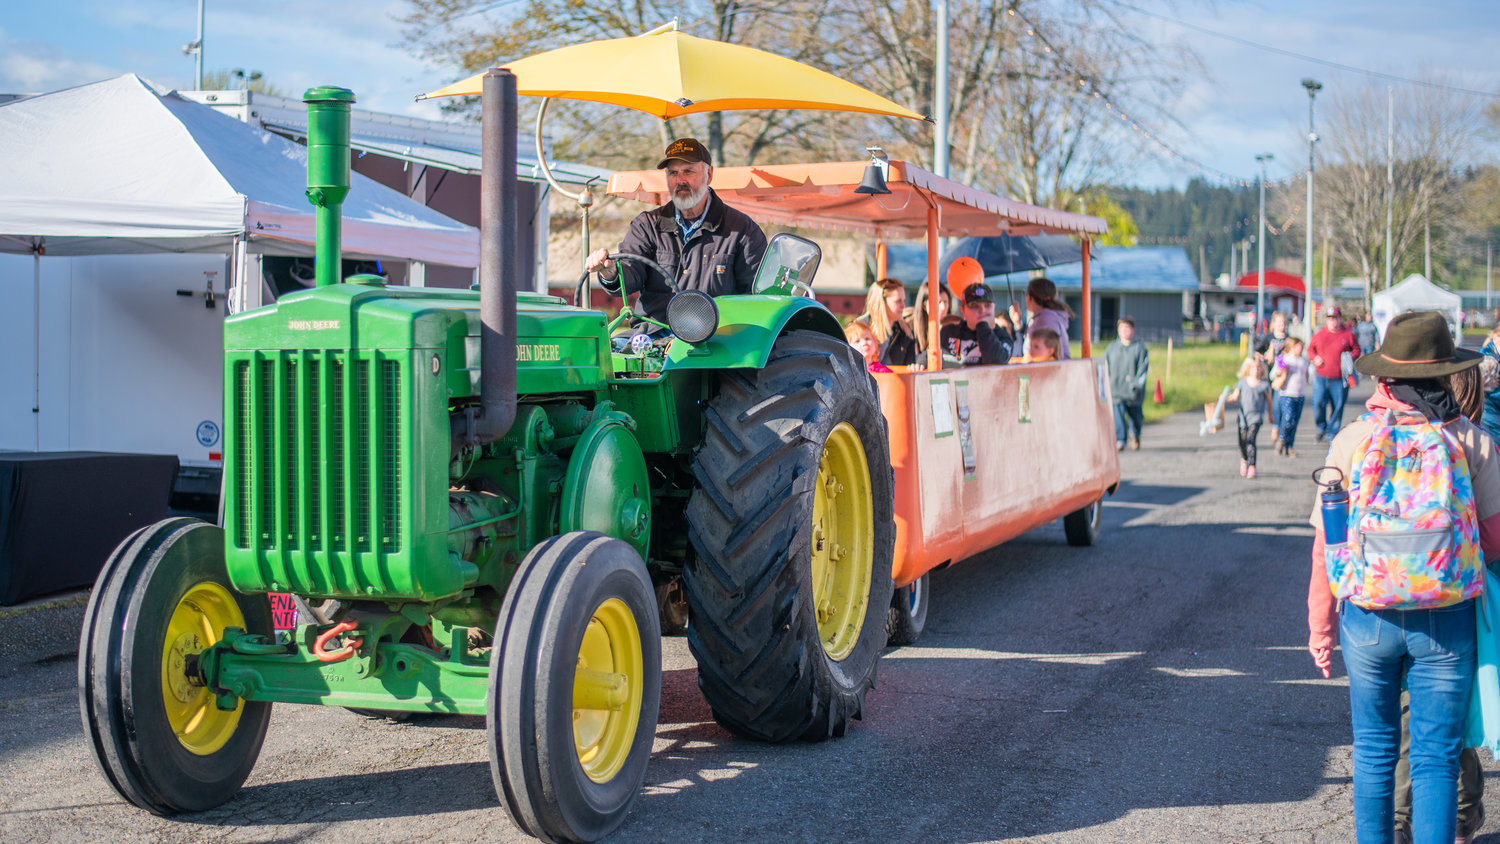 Dave King drives a tractor full of visitors through the Southwest Washington Fairgrounds in Centralia on Saturday.